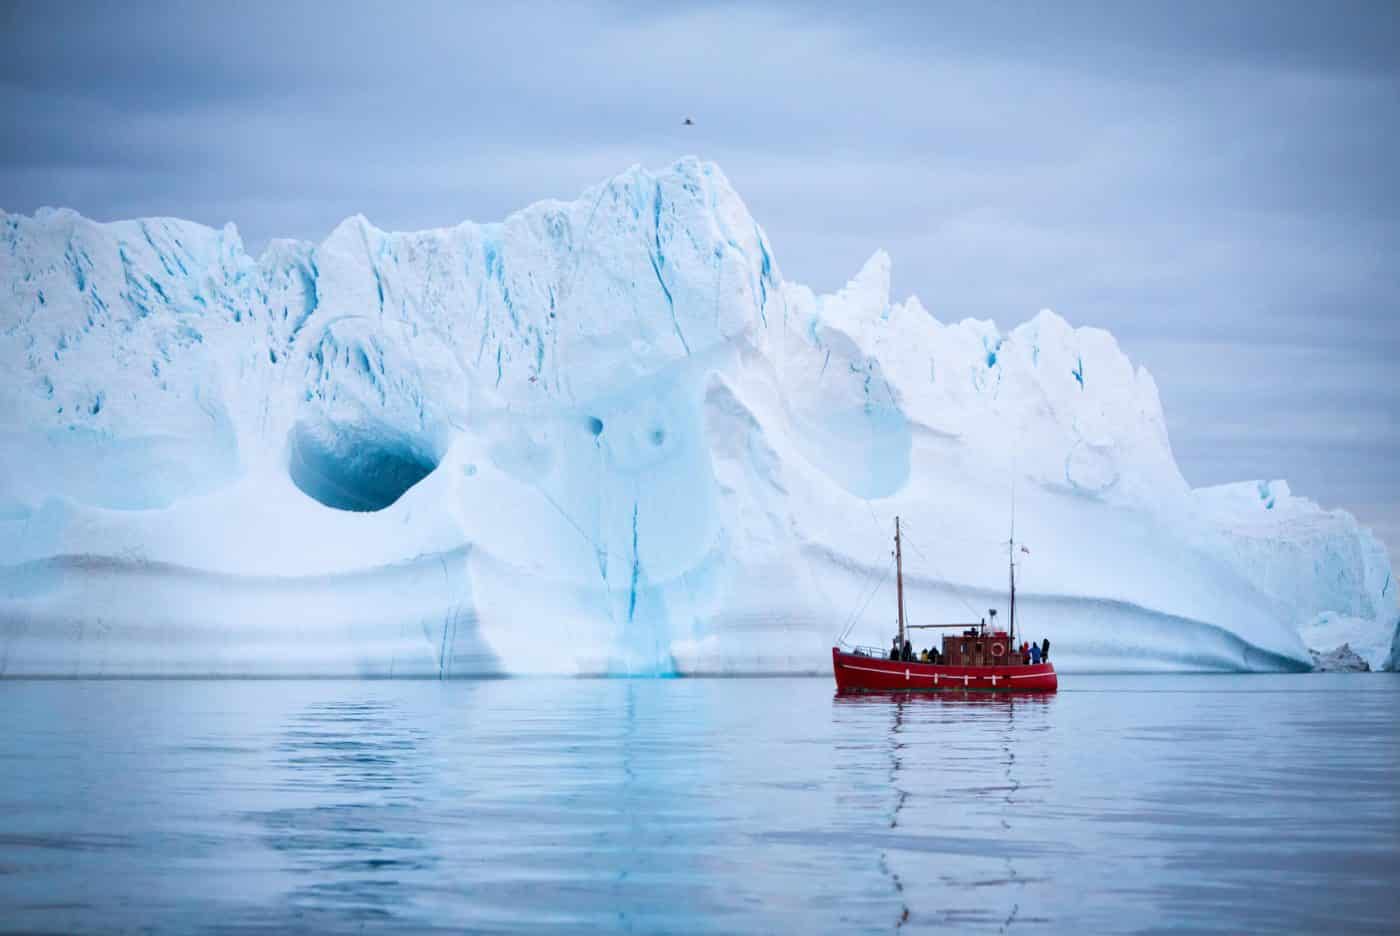 Tourists on a boat tour sailing by a giant iceberg near Ilulissat in North Greenland. By Paul Zizka